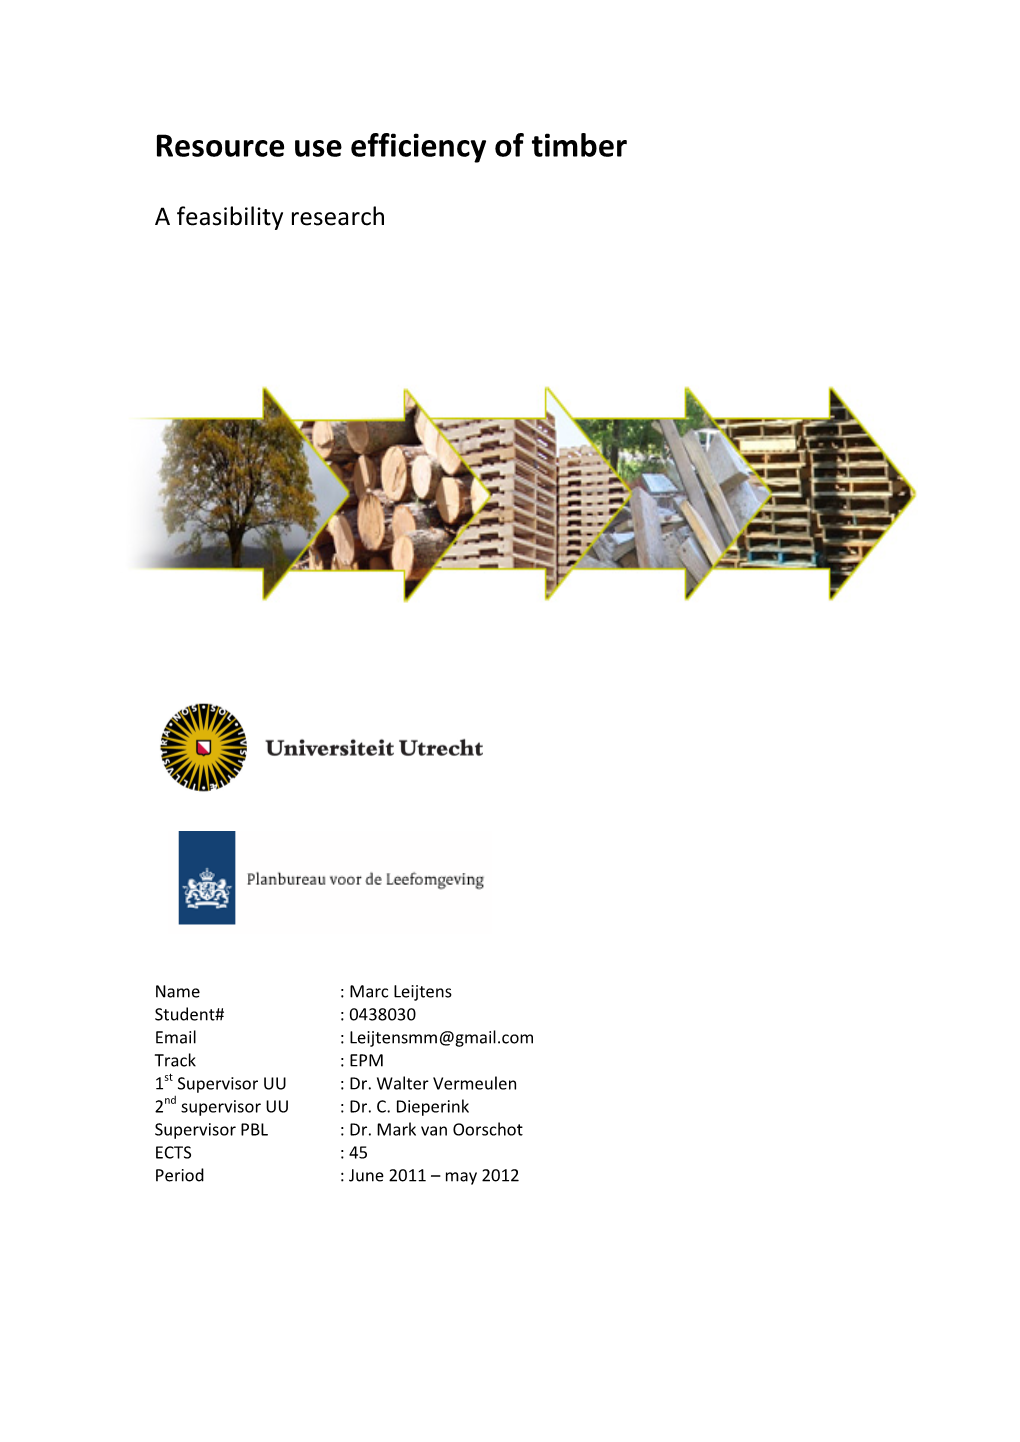 Resource Use Efficiency of Timber